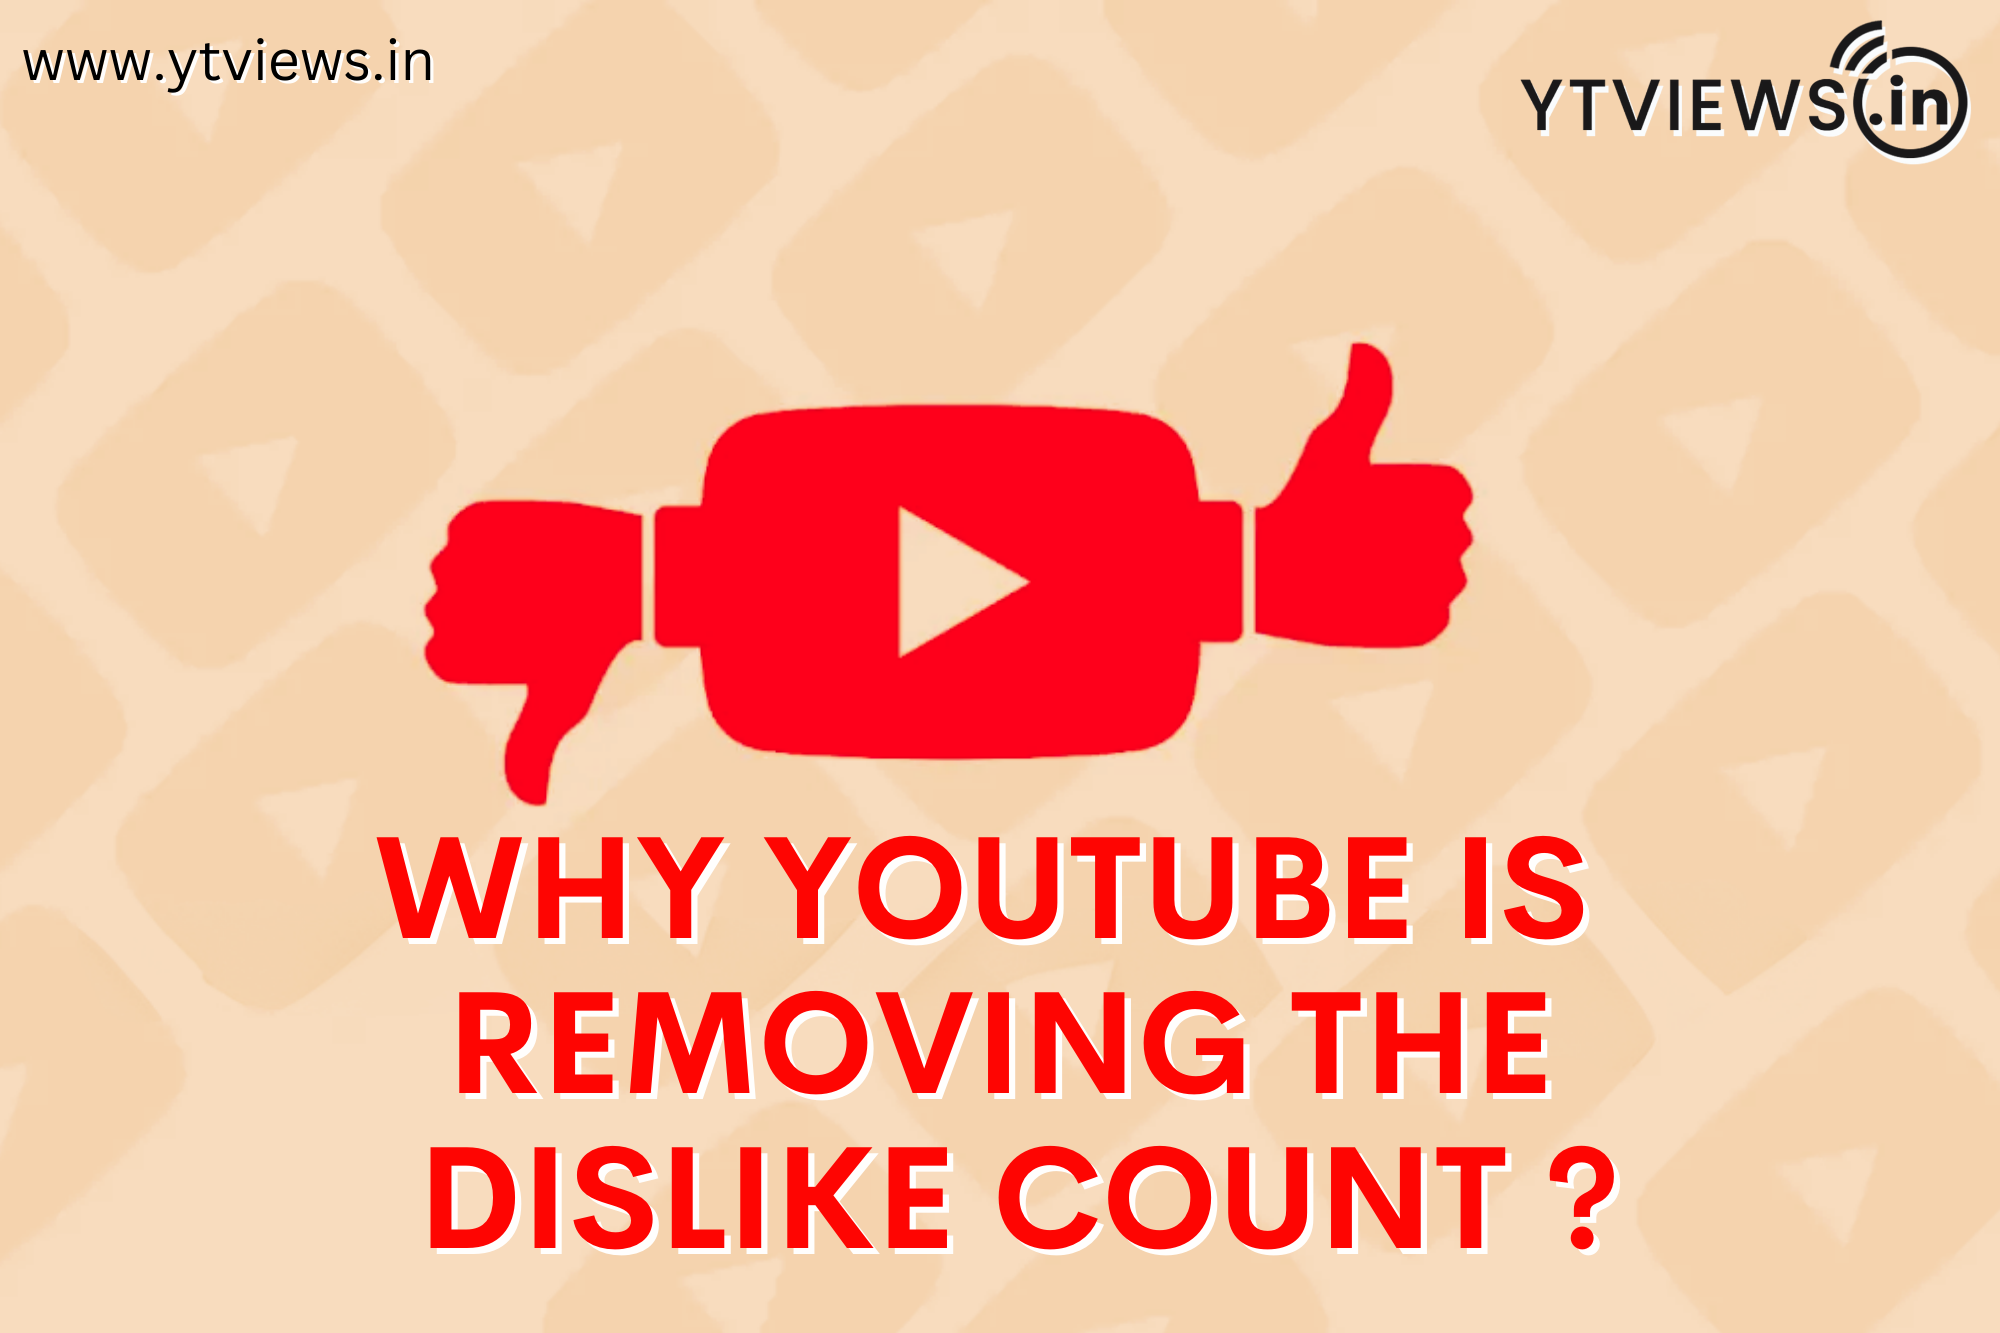 Why YouTube is removing the dislike count